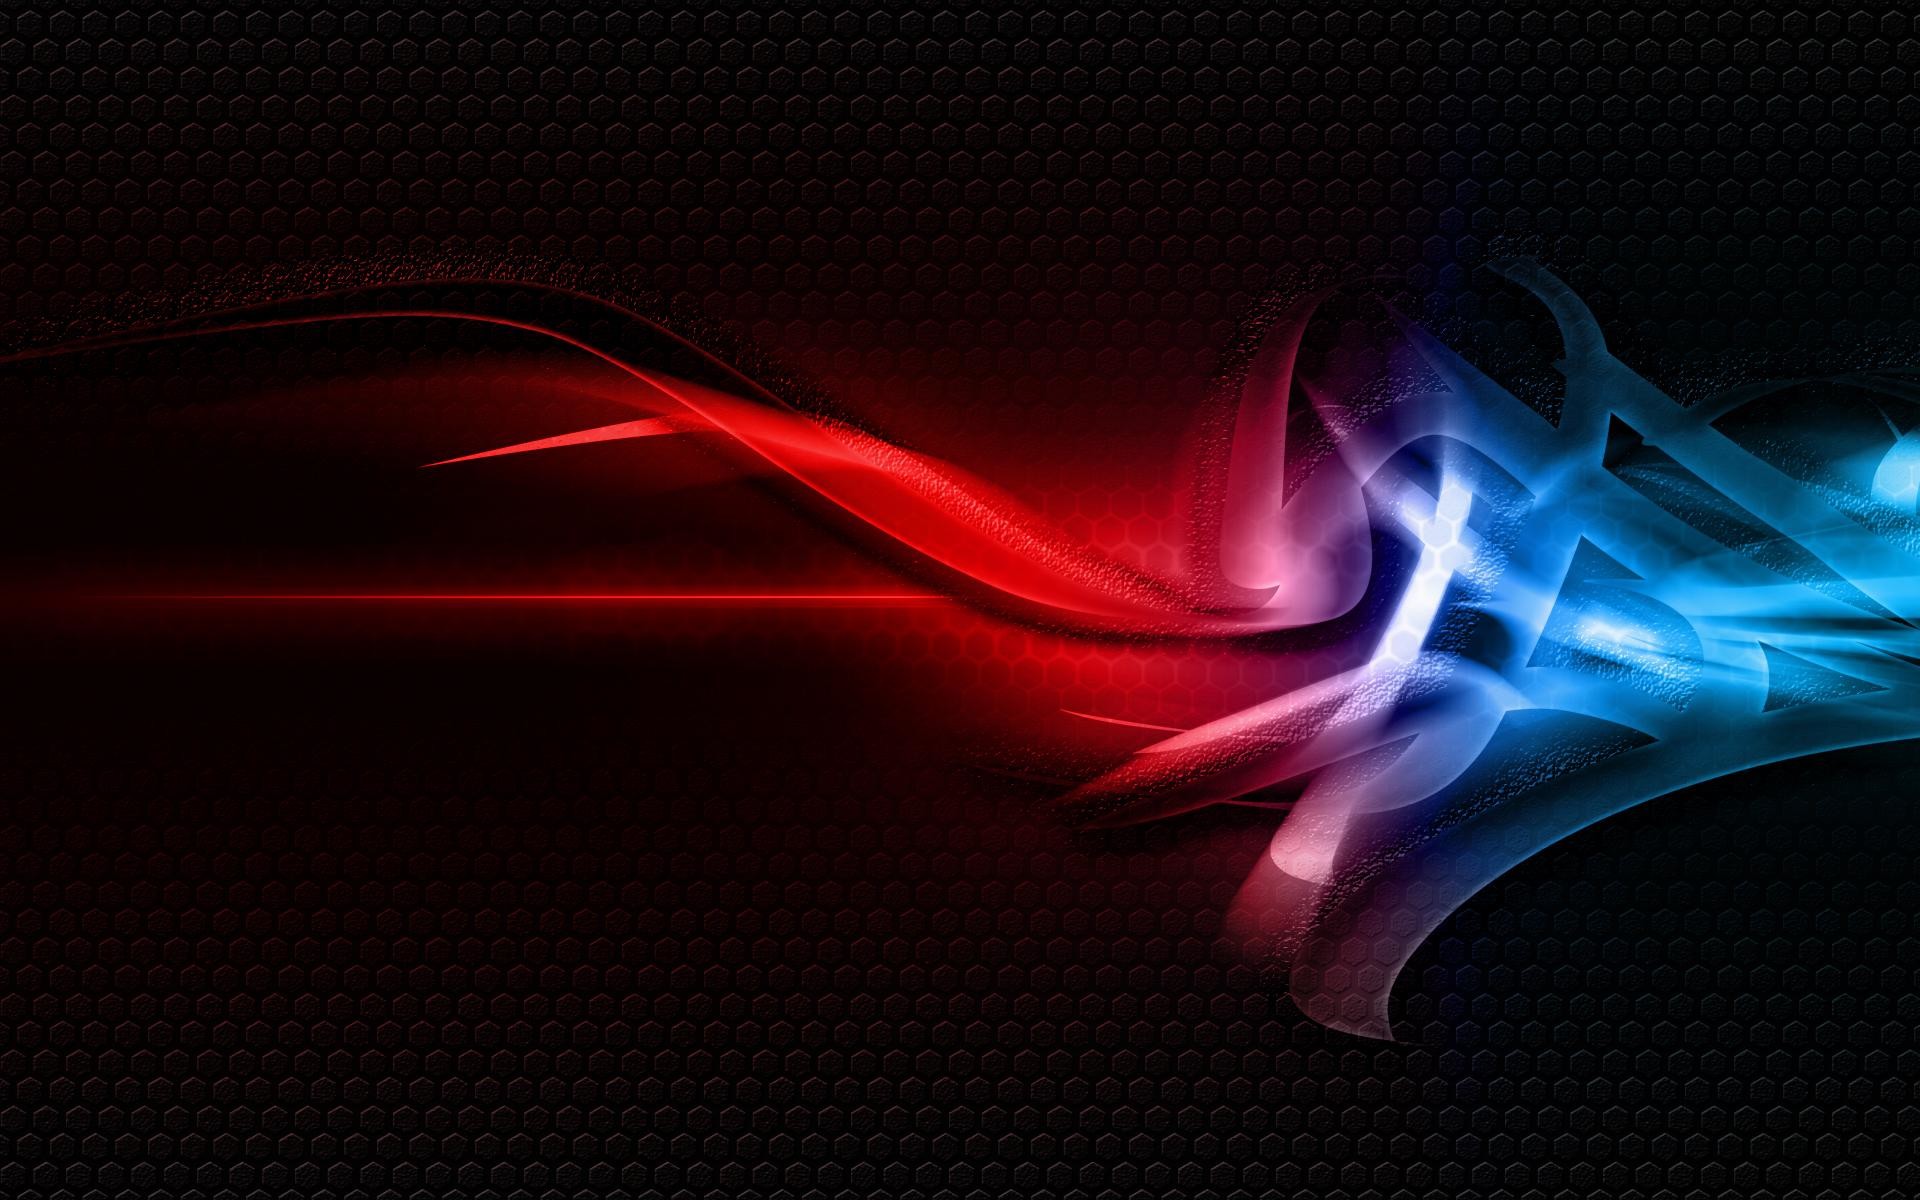 wallpaper.wiki-Red-and-blue-abstract-images-PIC-